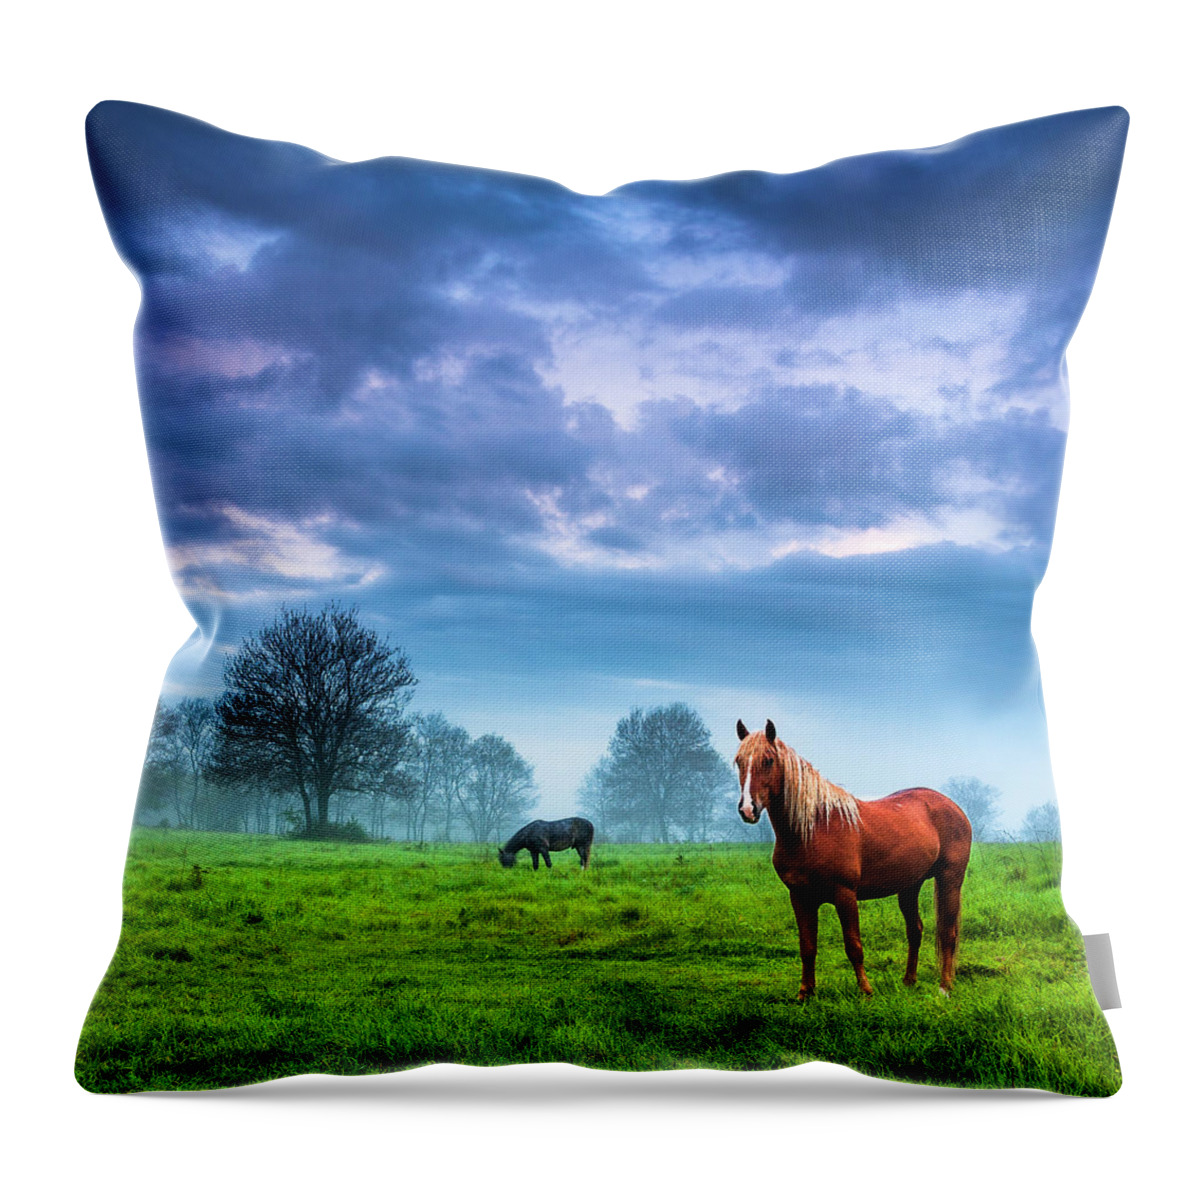 Fog Throw Pillow featuring the photograph Green Morn by Evgeni Dinev